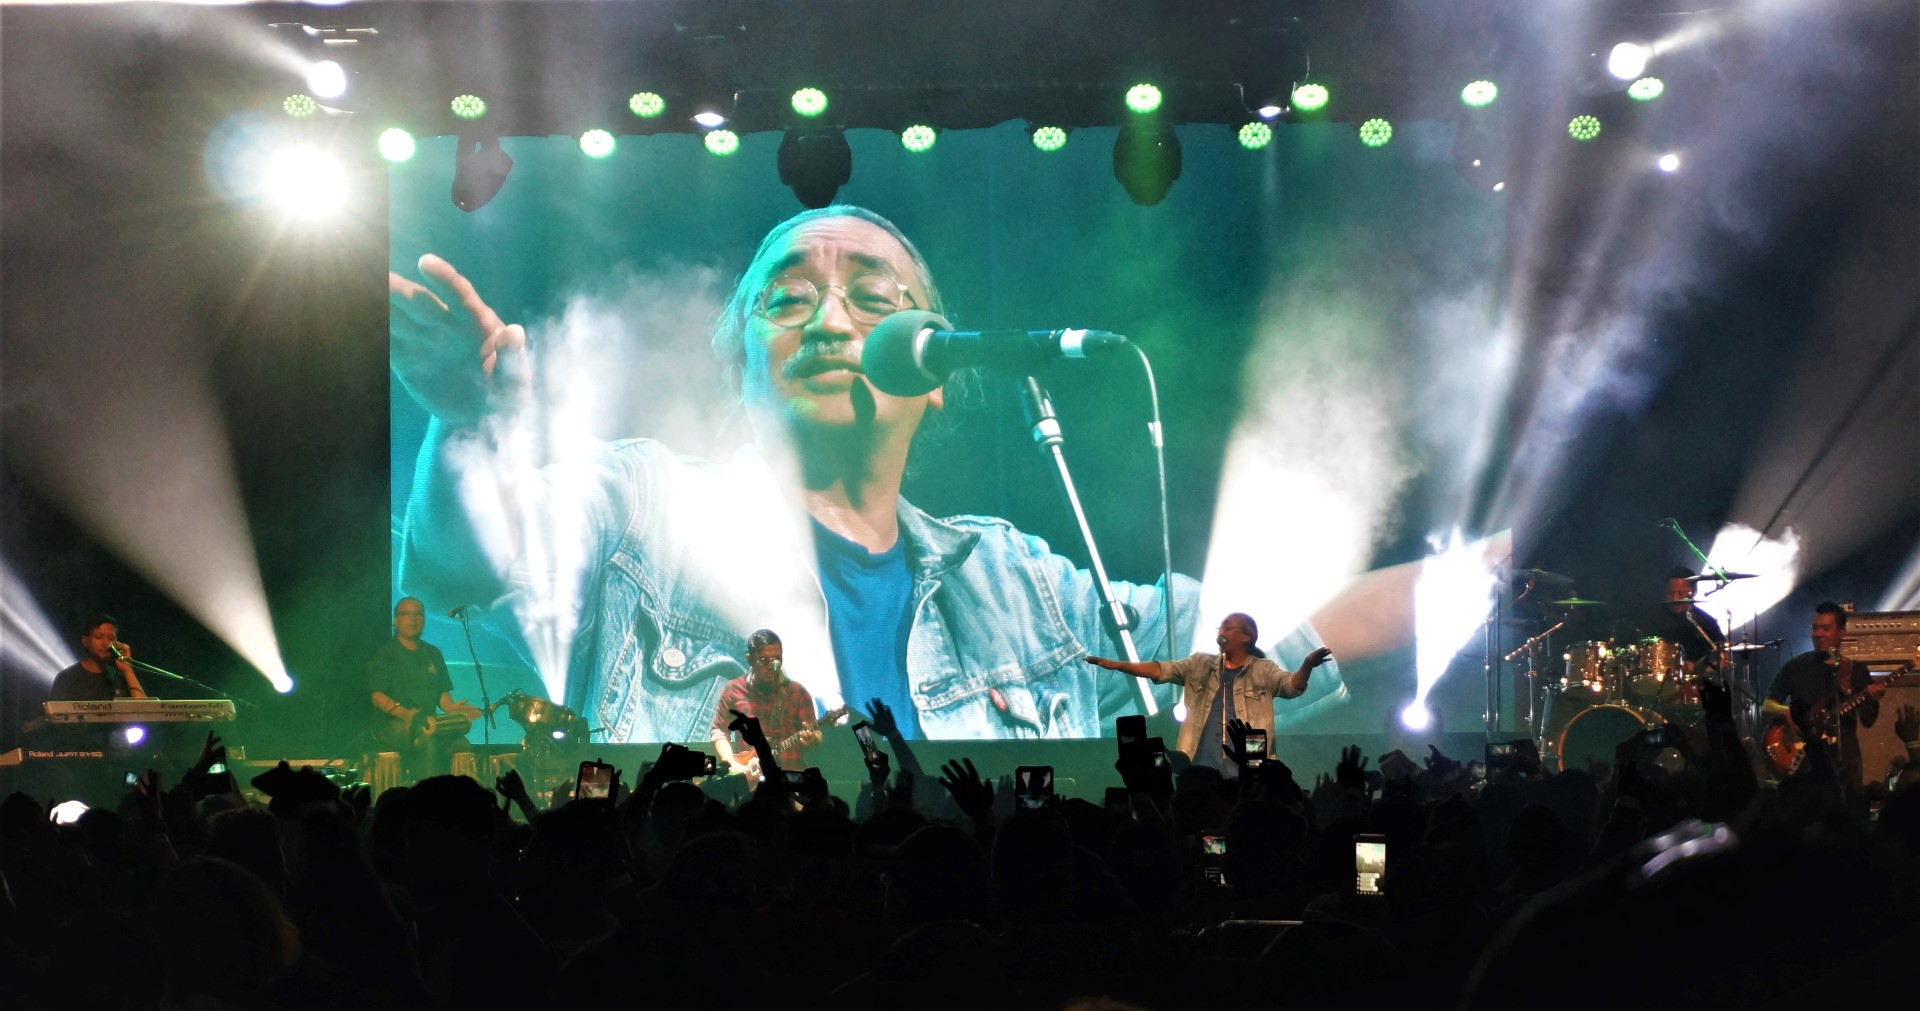 Nepathya to embark on a month long Nepal tour